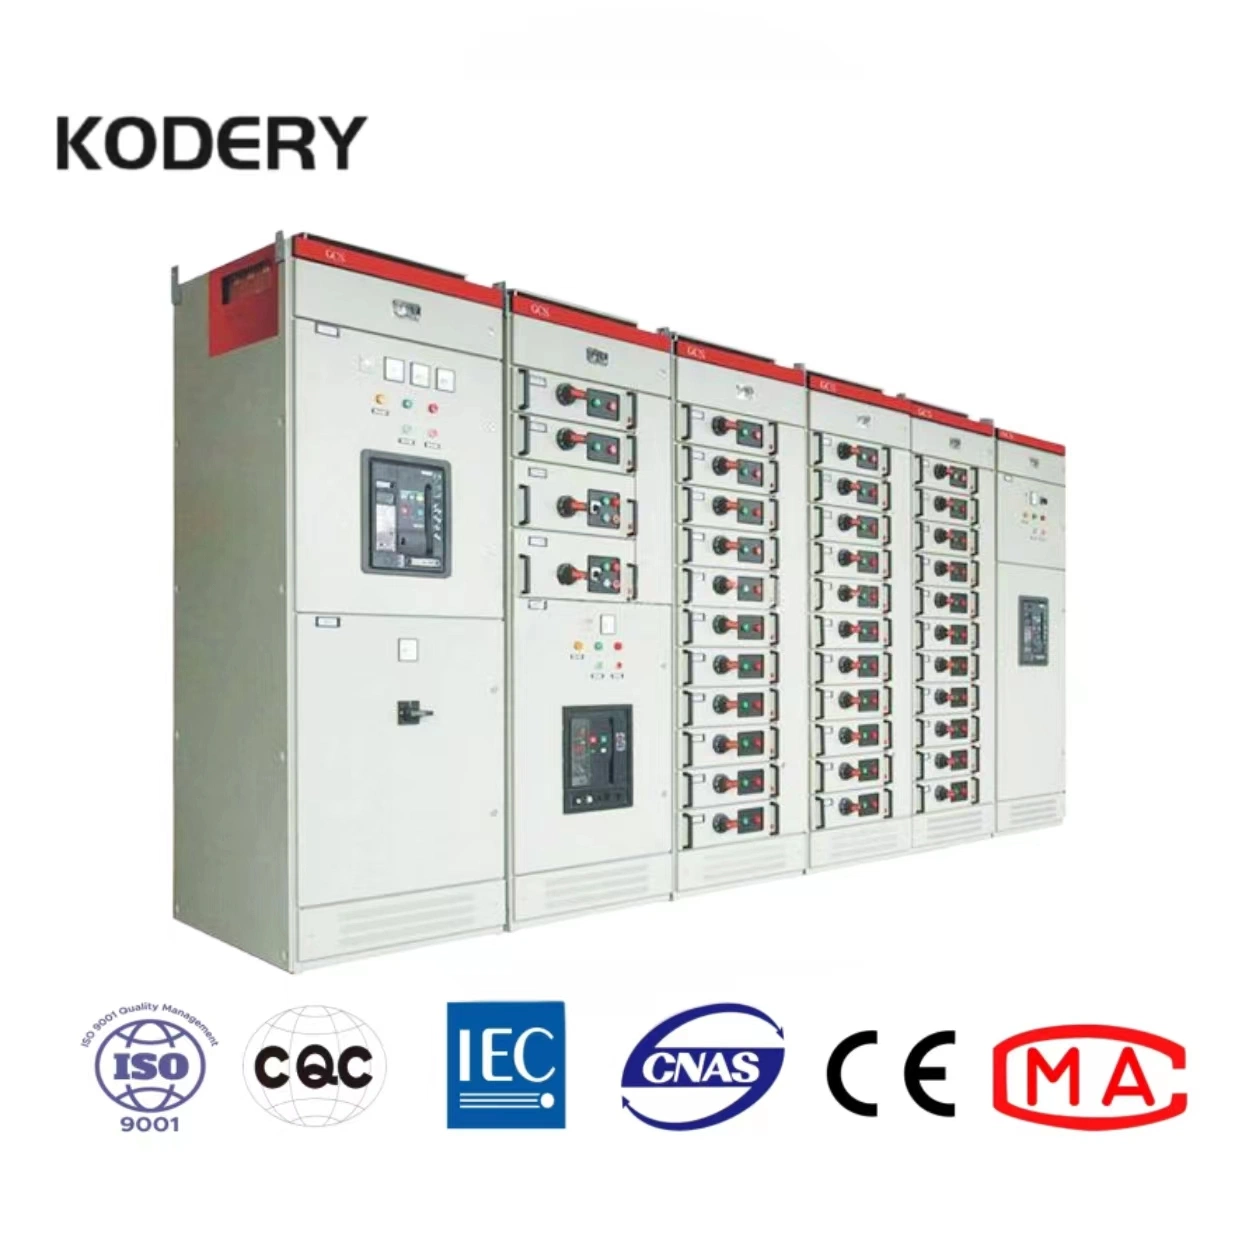 Gcs Oil Transformer Low-Voltage Withdrawable Switchgear Power Distribution Cabinet